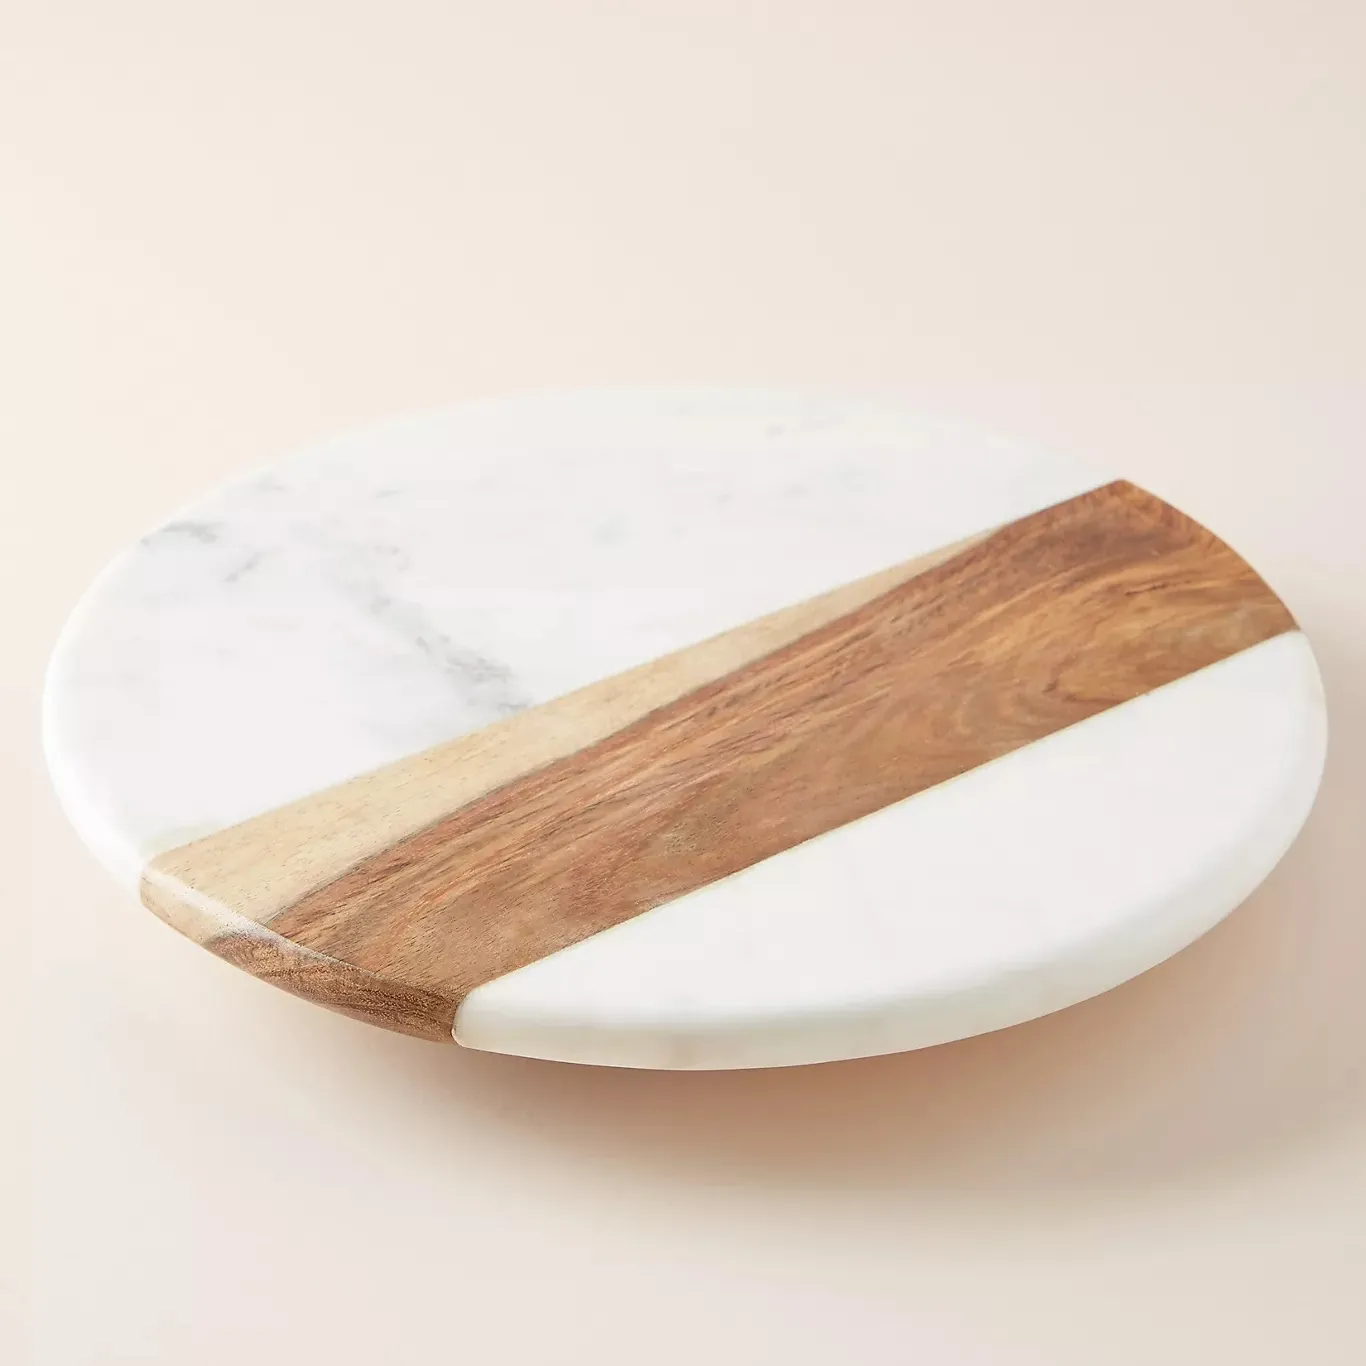 Shende 15 inch acacia wood and marble swivel cheese board lazy susan